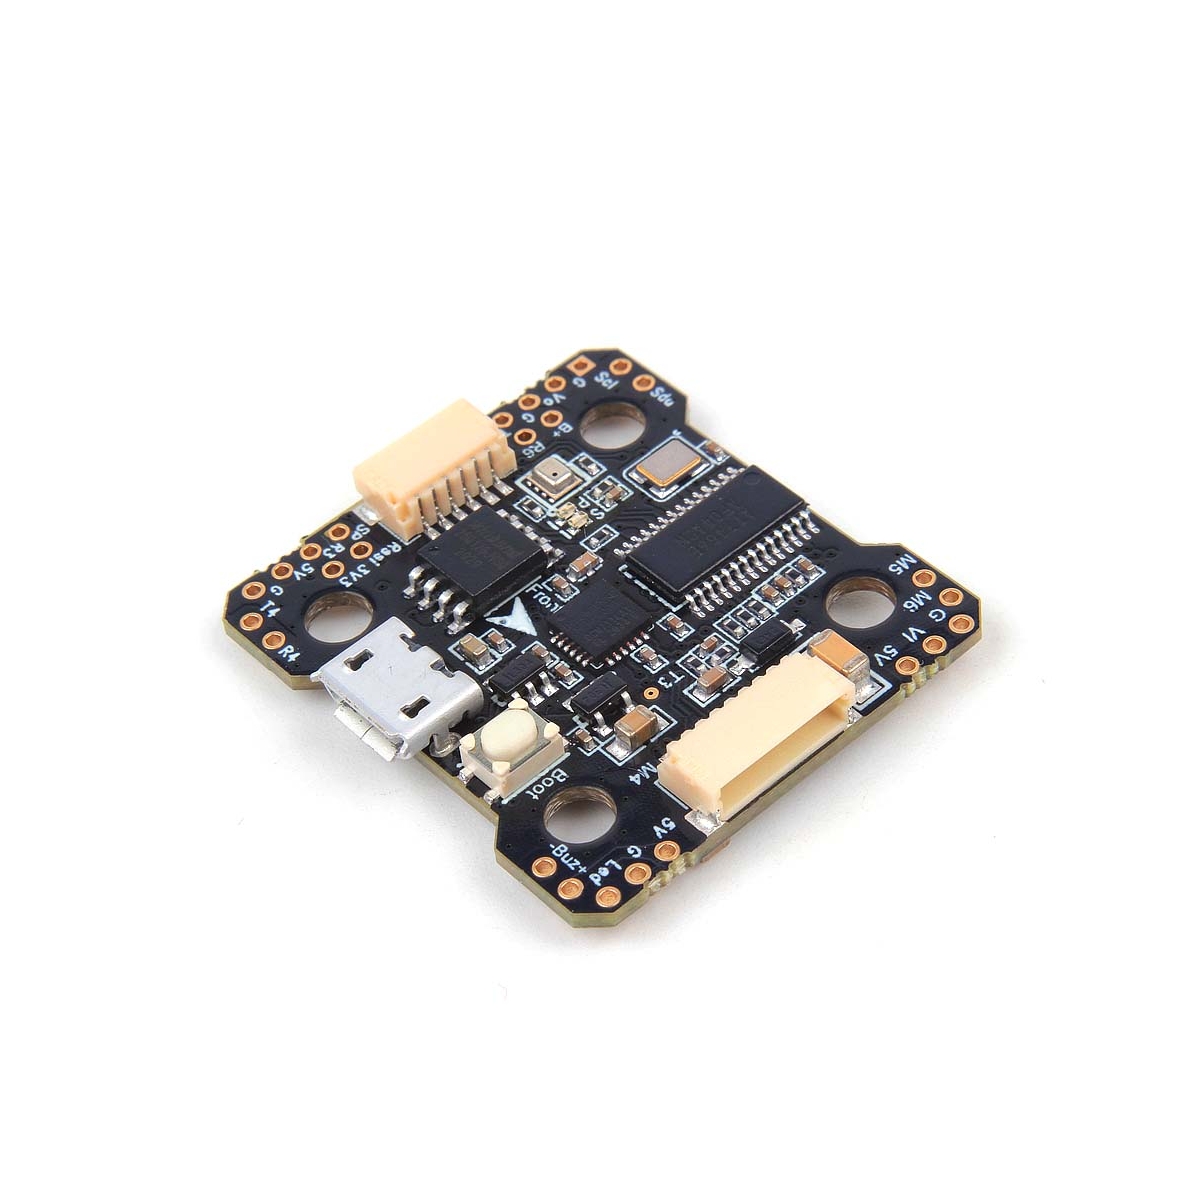 FC for FPV drone with 4K camera